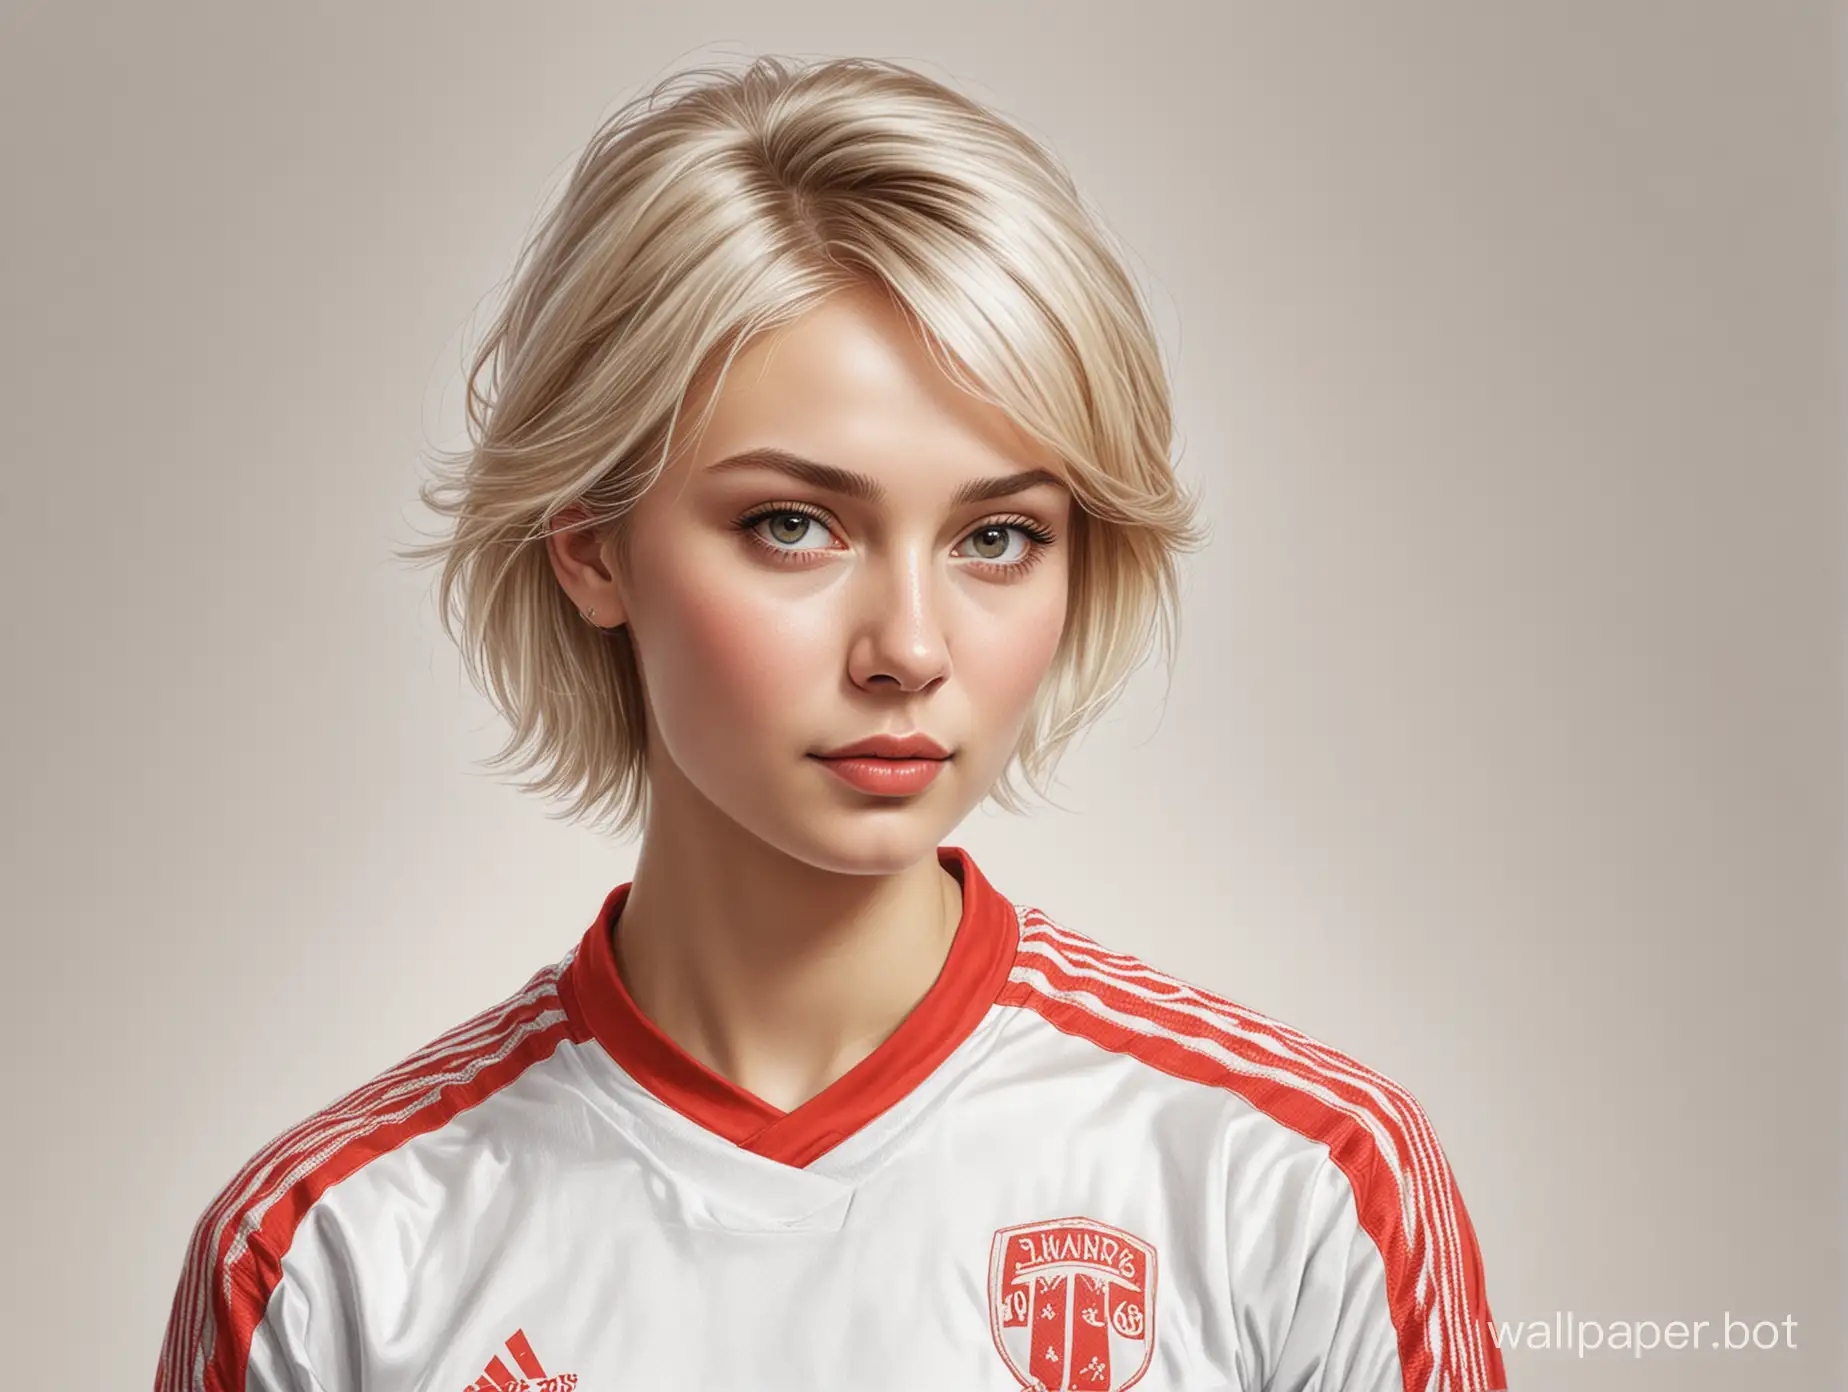 Sketch of young Irina Chashchina with blonde short hair, size 4 chest, narrow waist in red and white soccer uniform on white background, highly realistic liner drawing